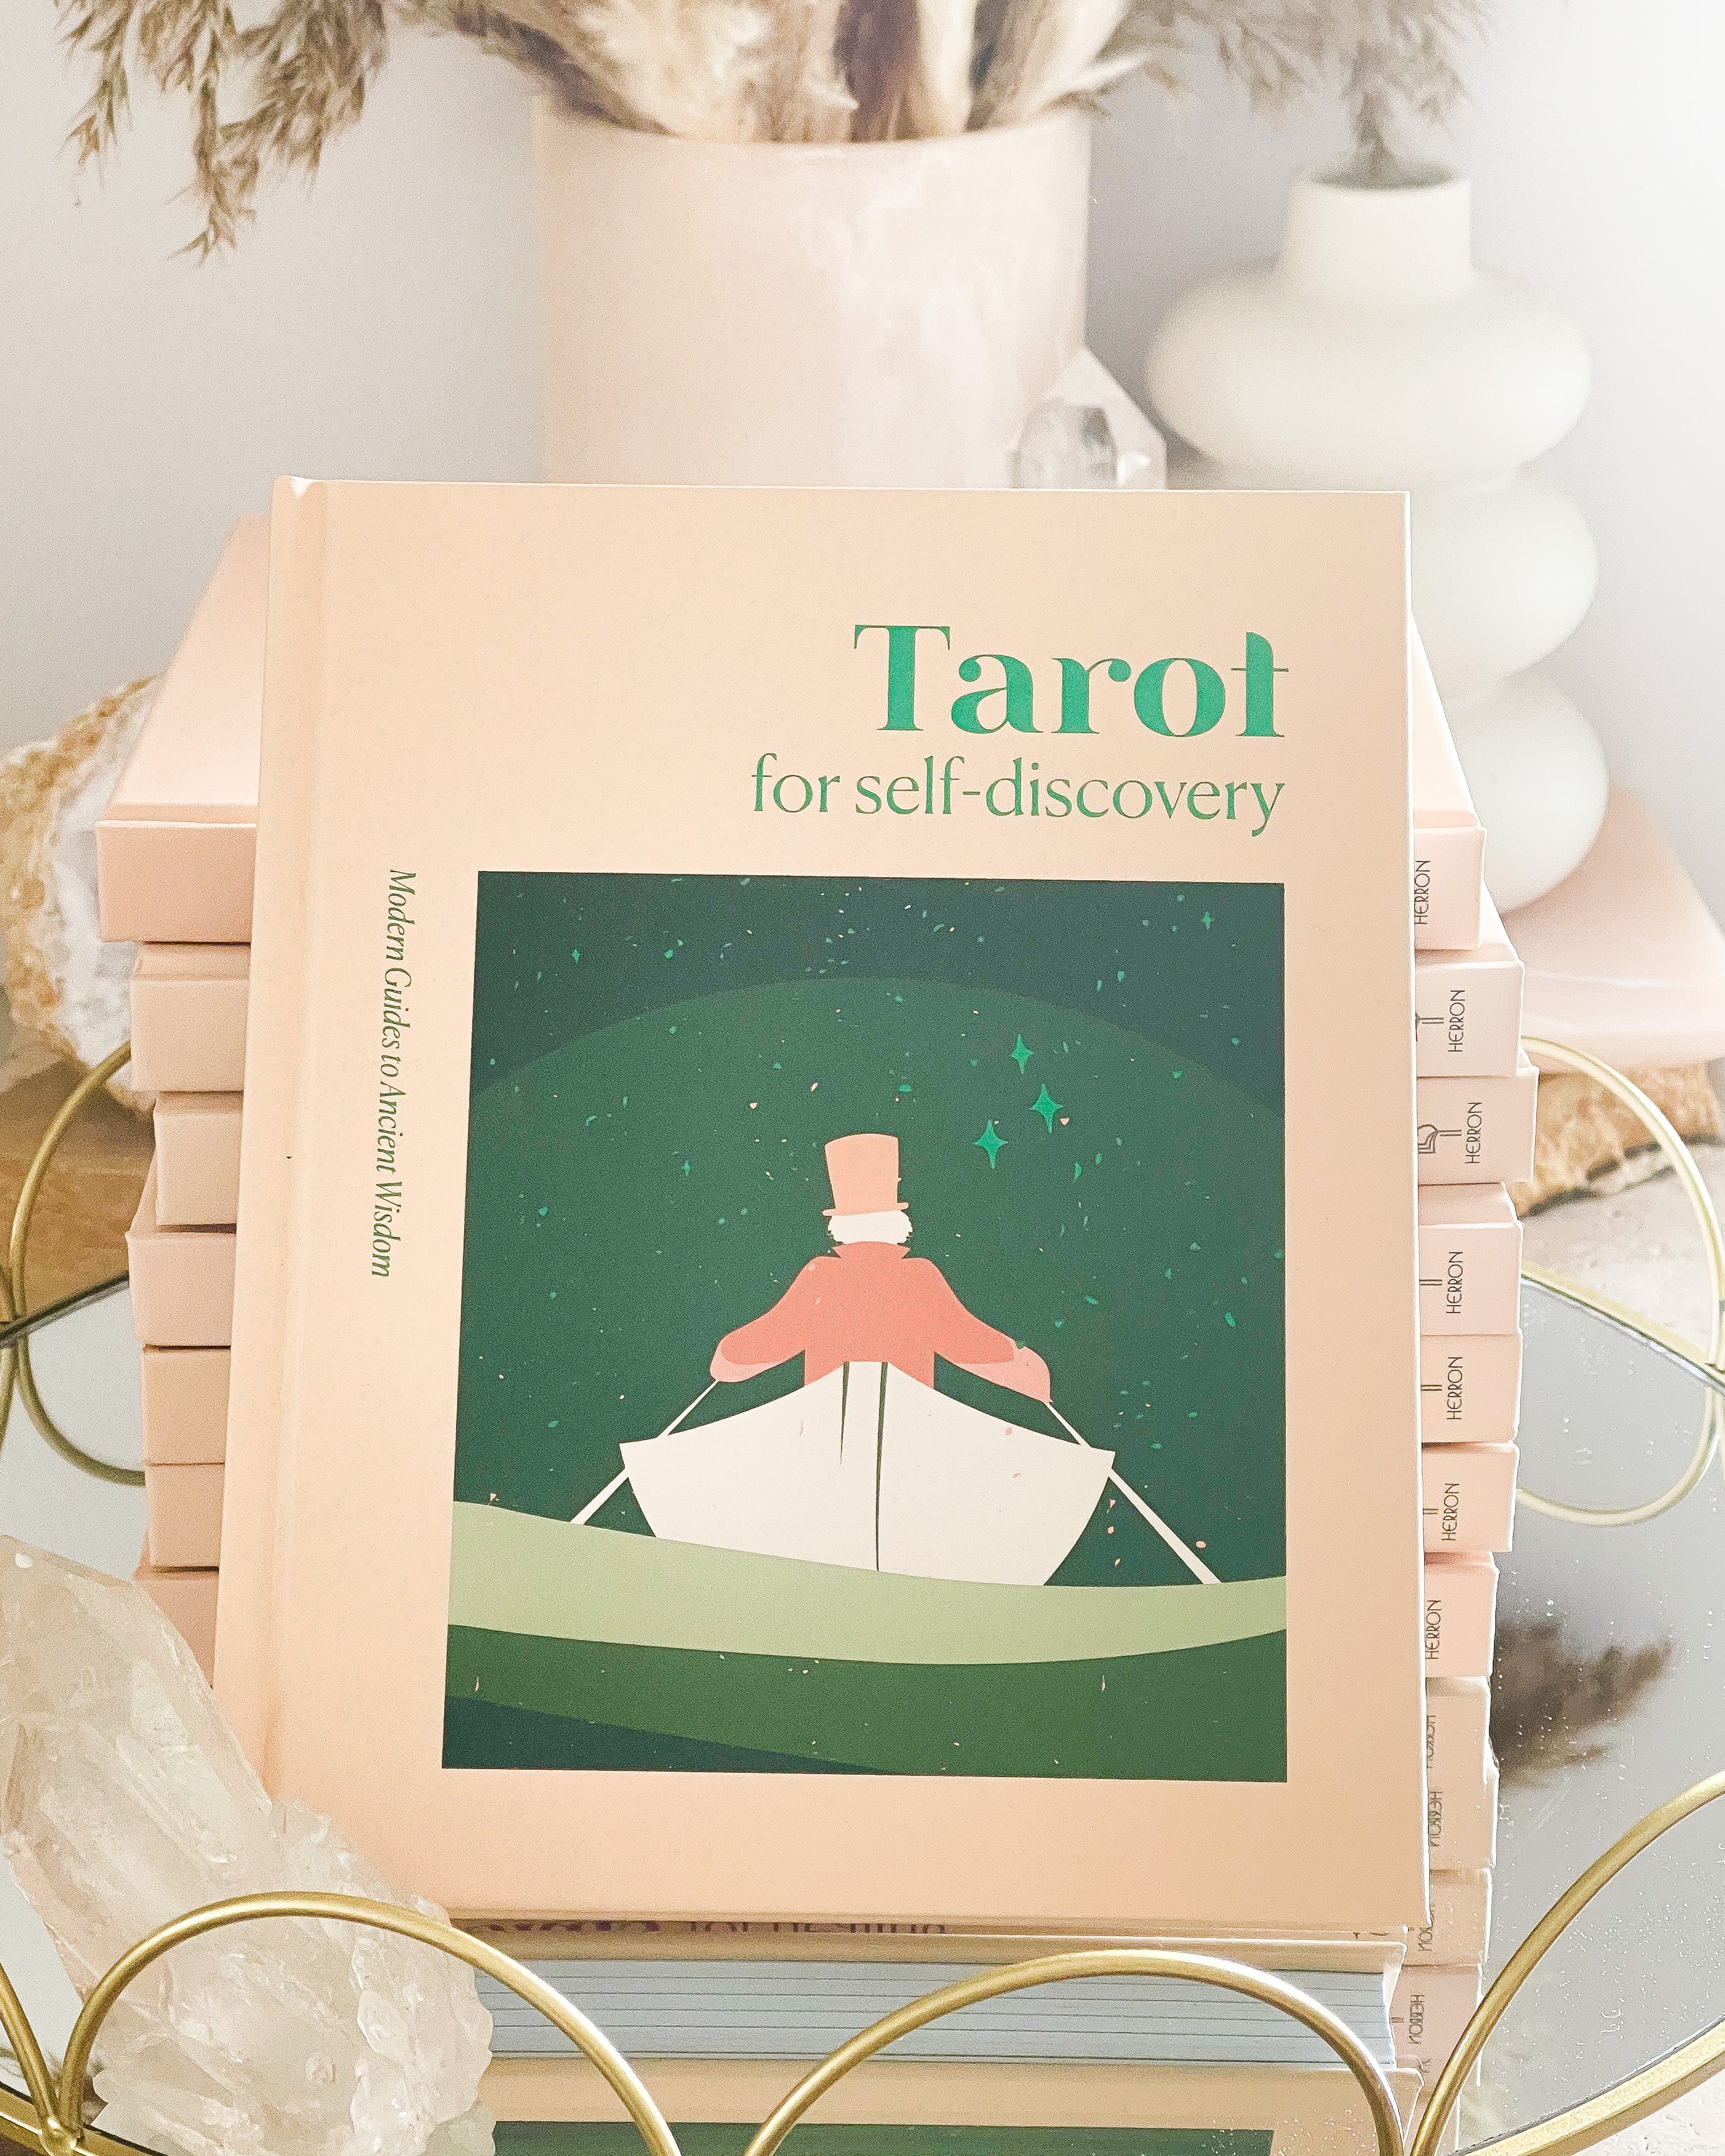 Tarot for self-discovery // Book // Guidance + Magic + Self-discovery